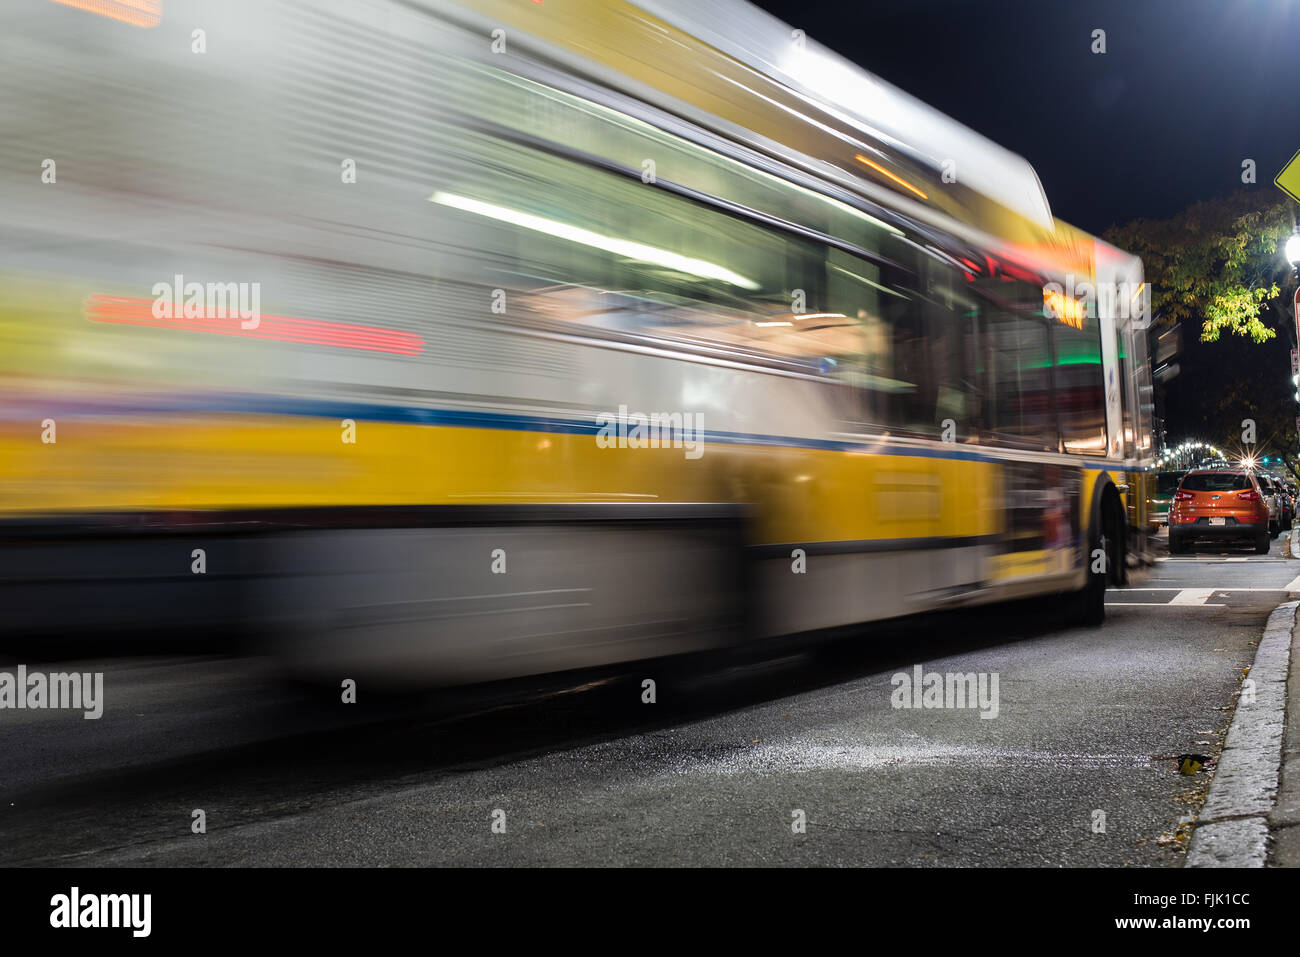 A bus pulling into the stop on a city street in Boston Stock Photo